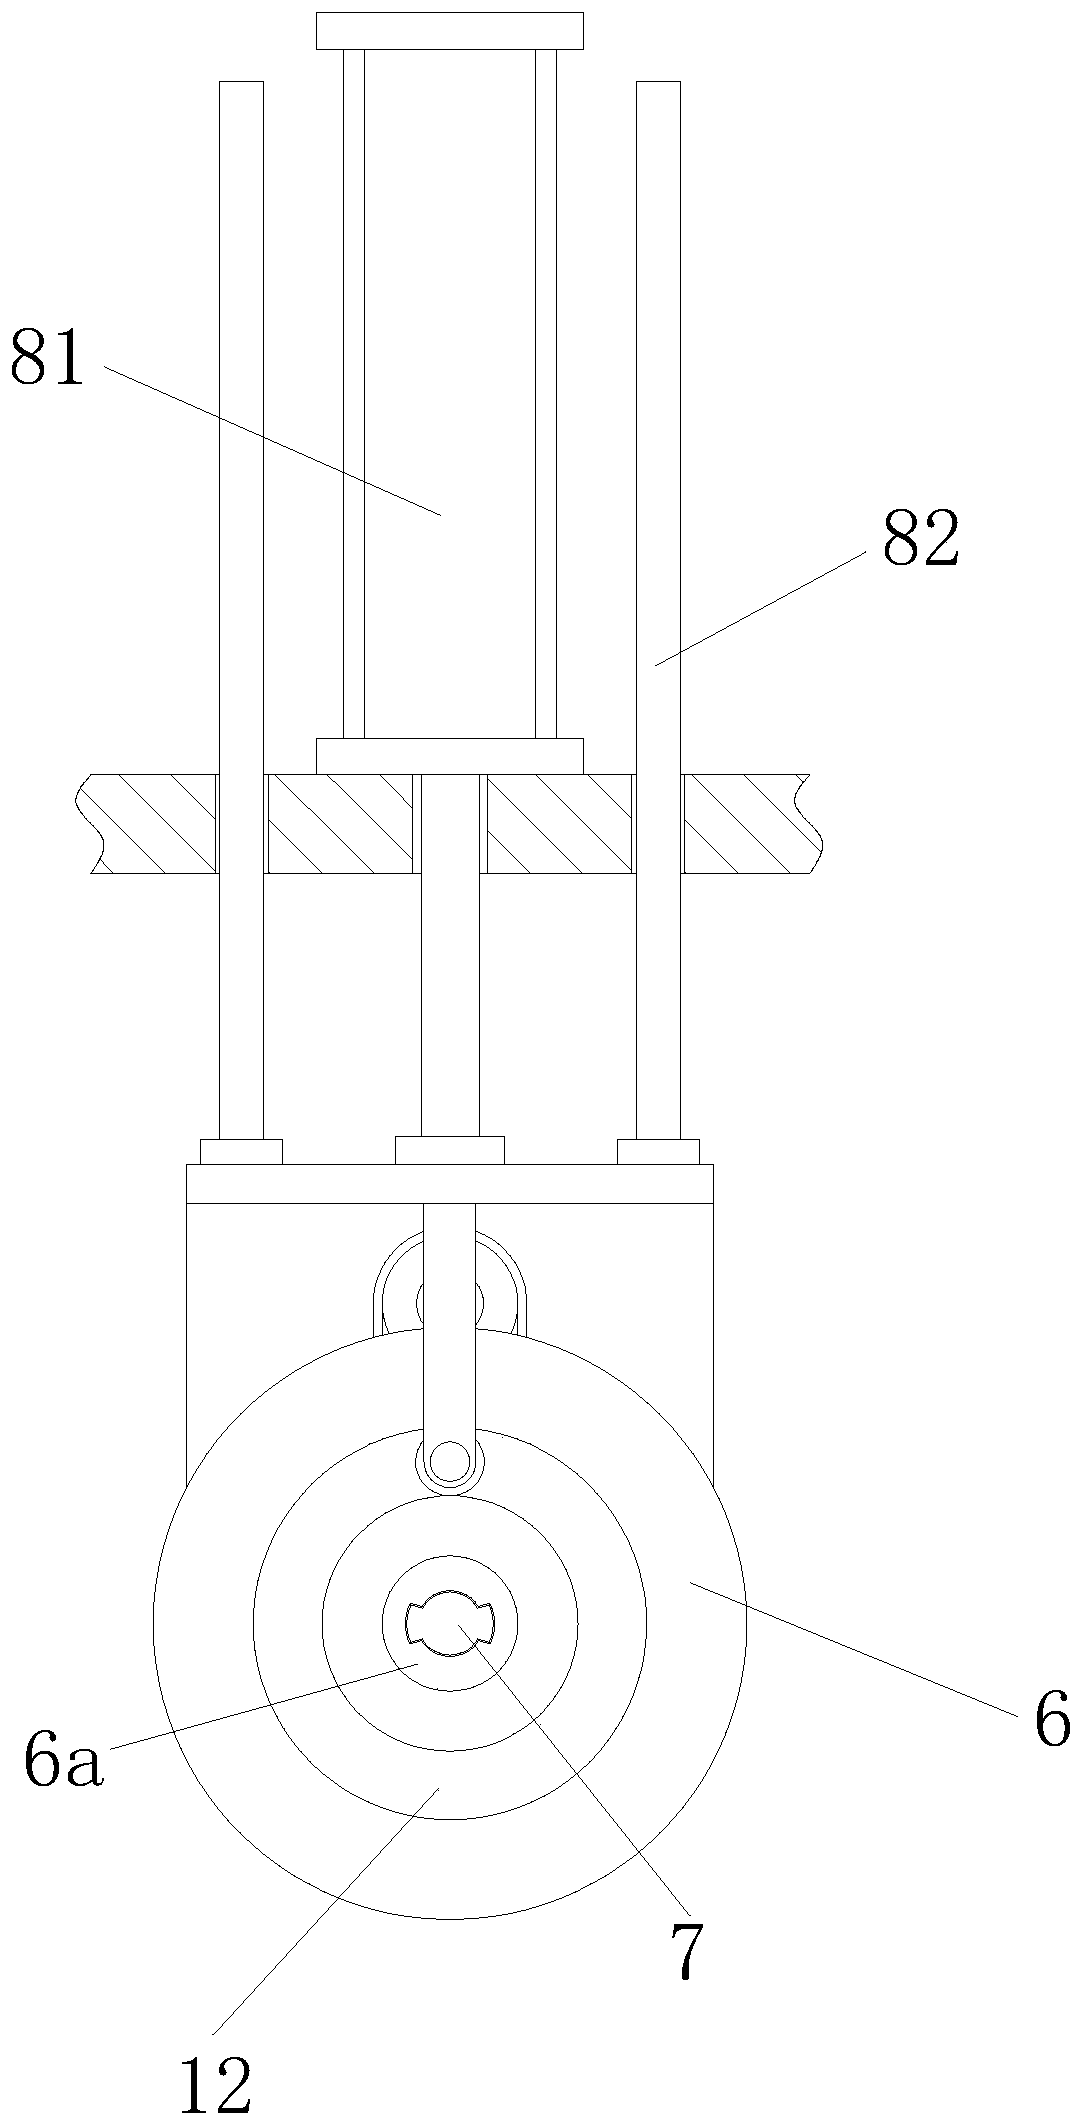 Device for conveniently demounting damaged graphite guide tube